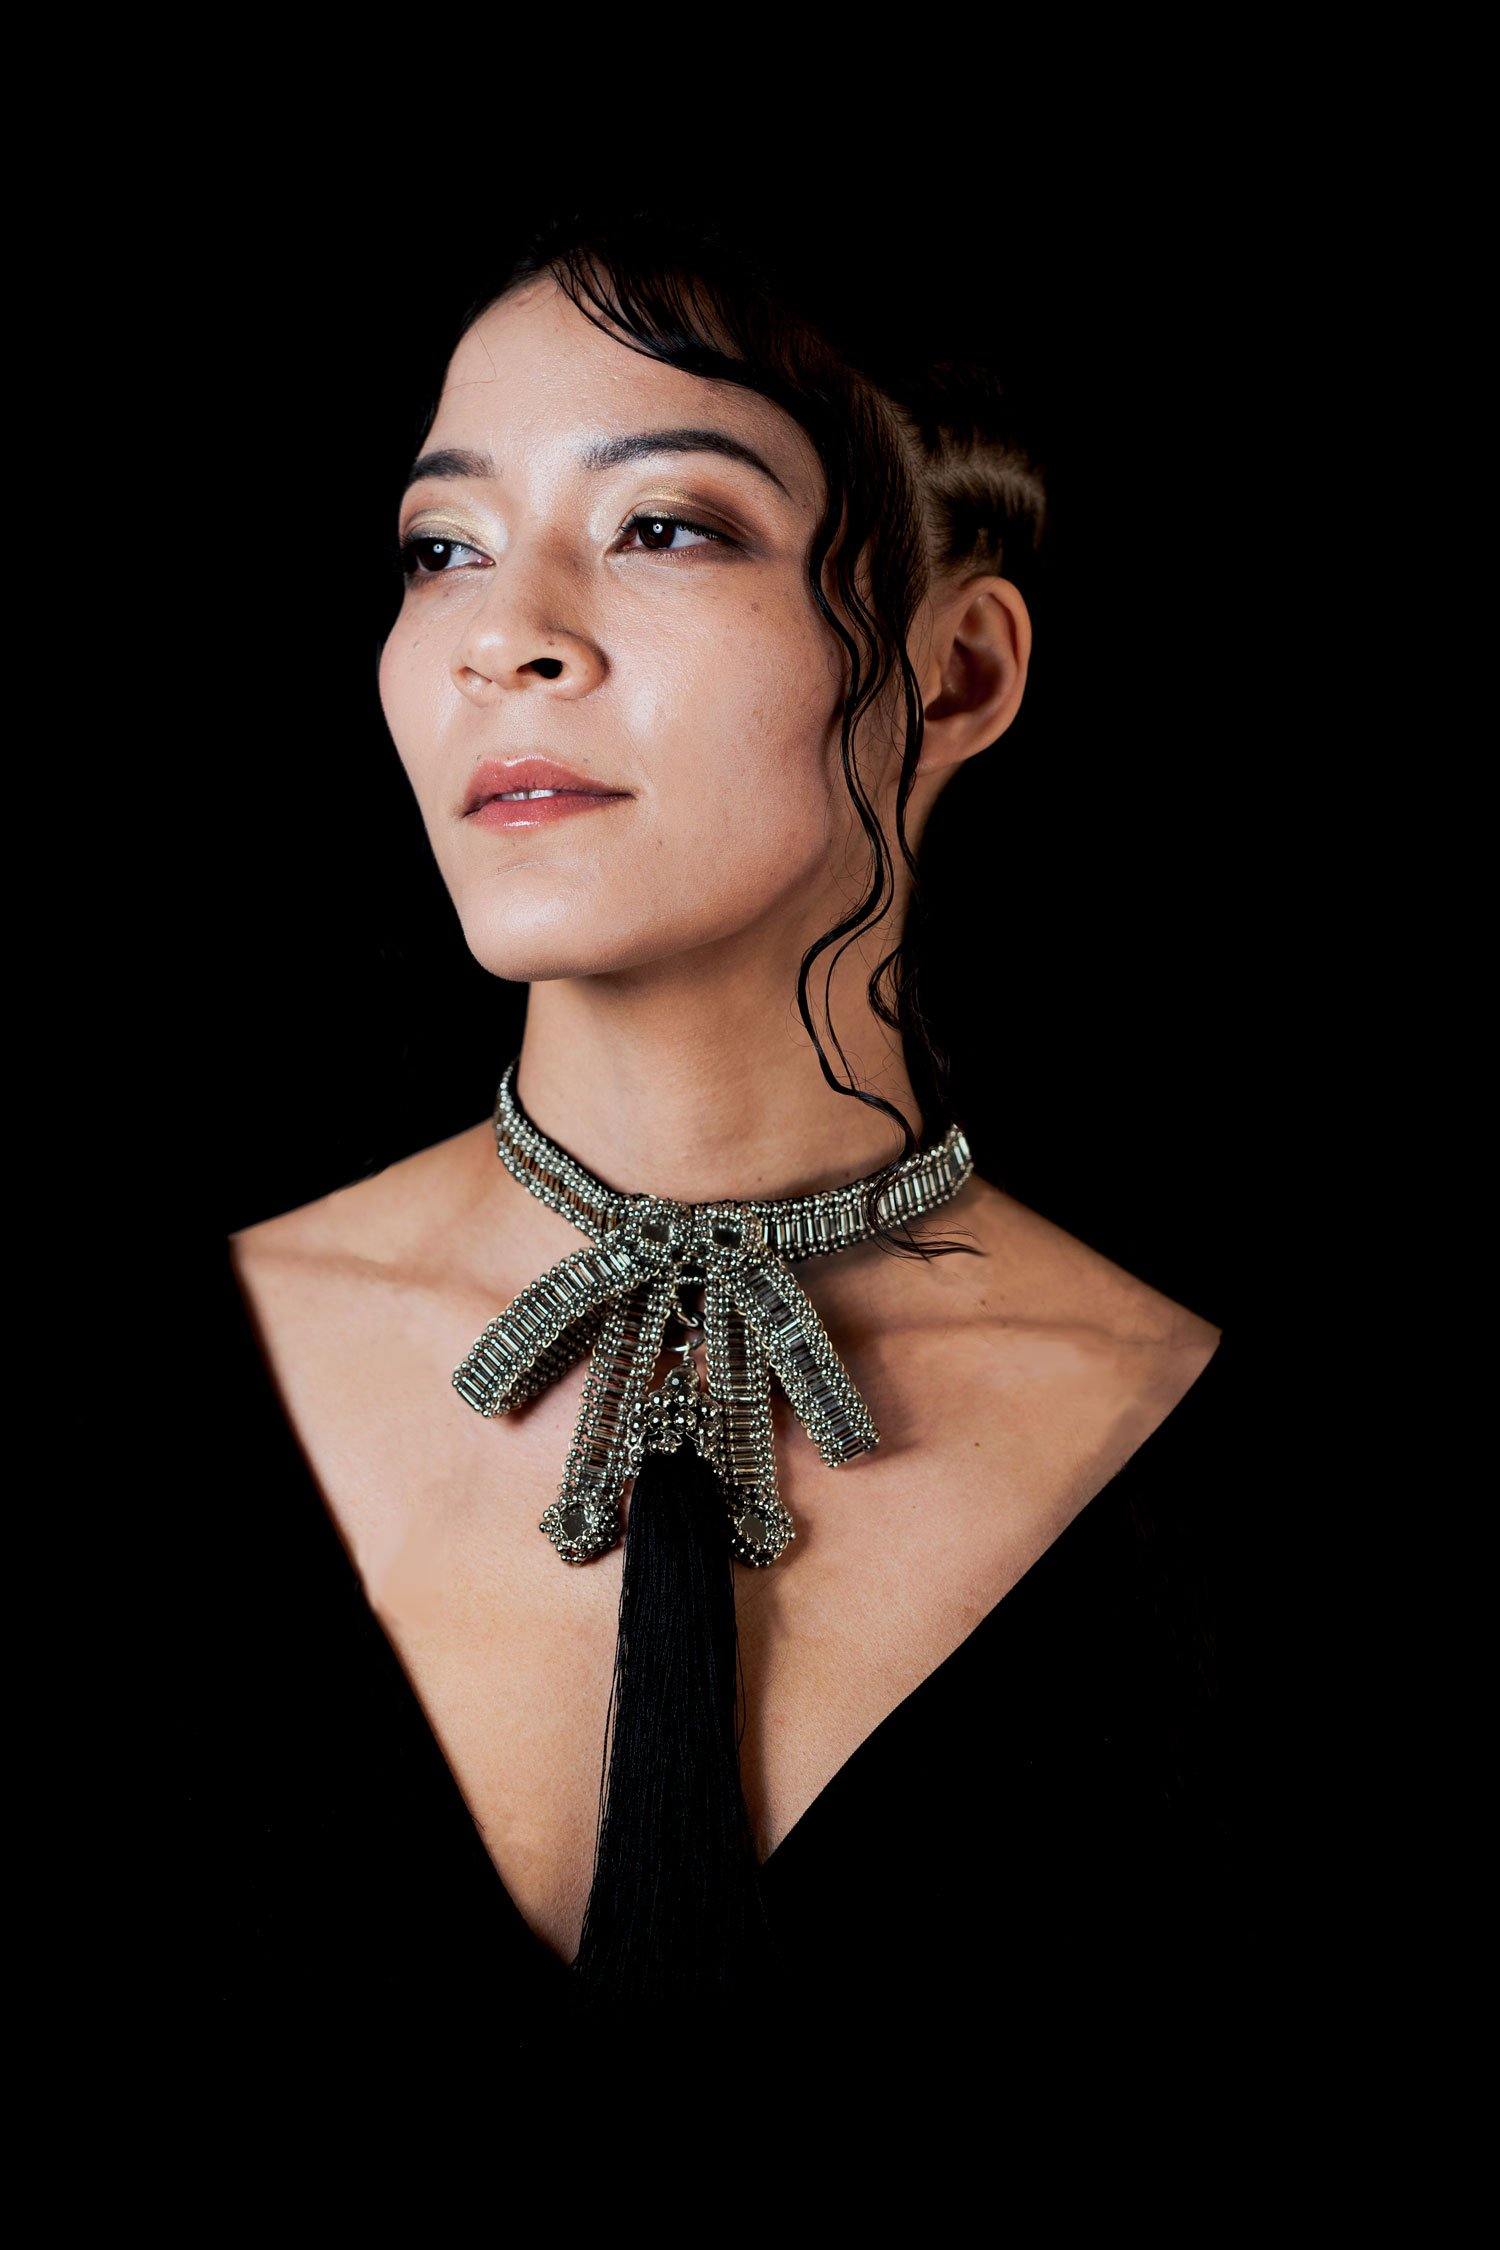 Amaya Choker by Object and Dawn is constructed entirely by hand with high quality metal beads that coated in polymer to preserve shine and ensure the item is hypoallergenic.  Ethically made by a team of our skilled in house artisans, with ancient techniques.  Fully lined in velvet for your ultimate comfort.